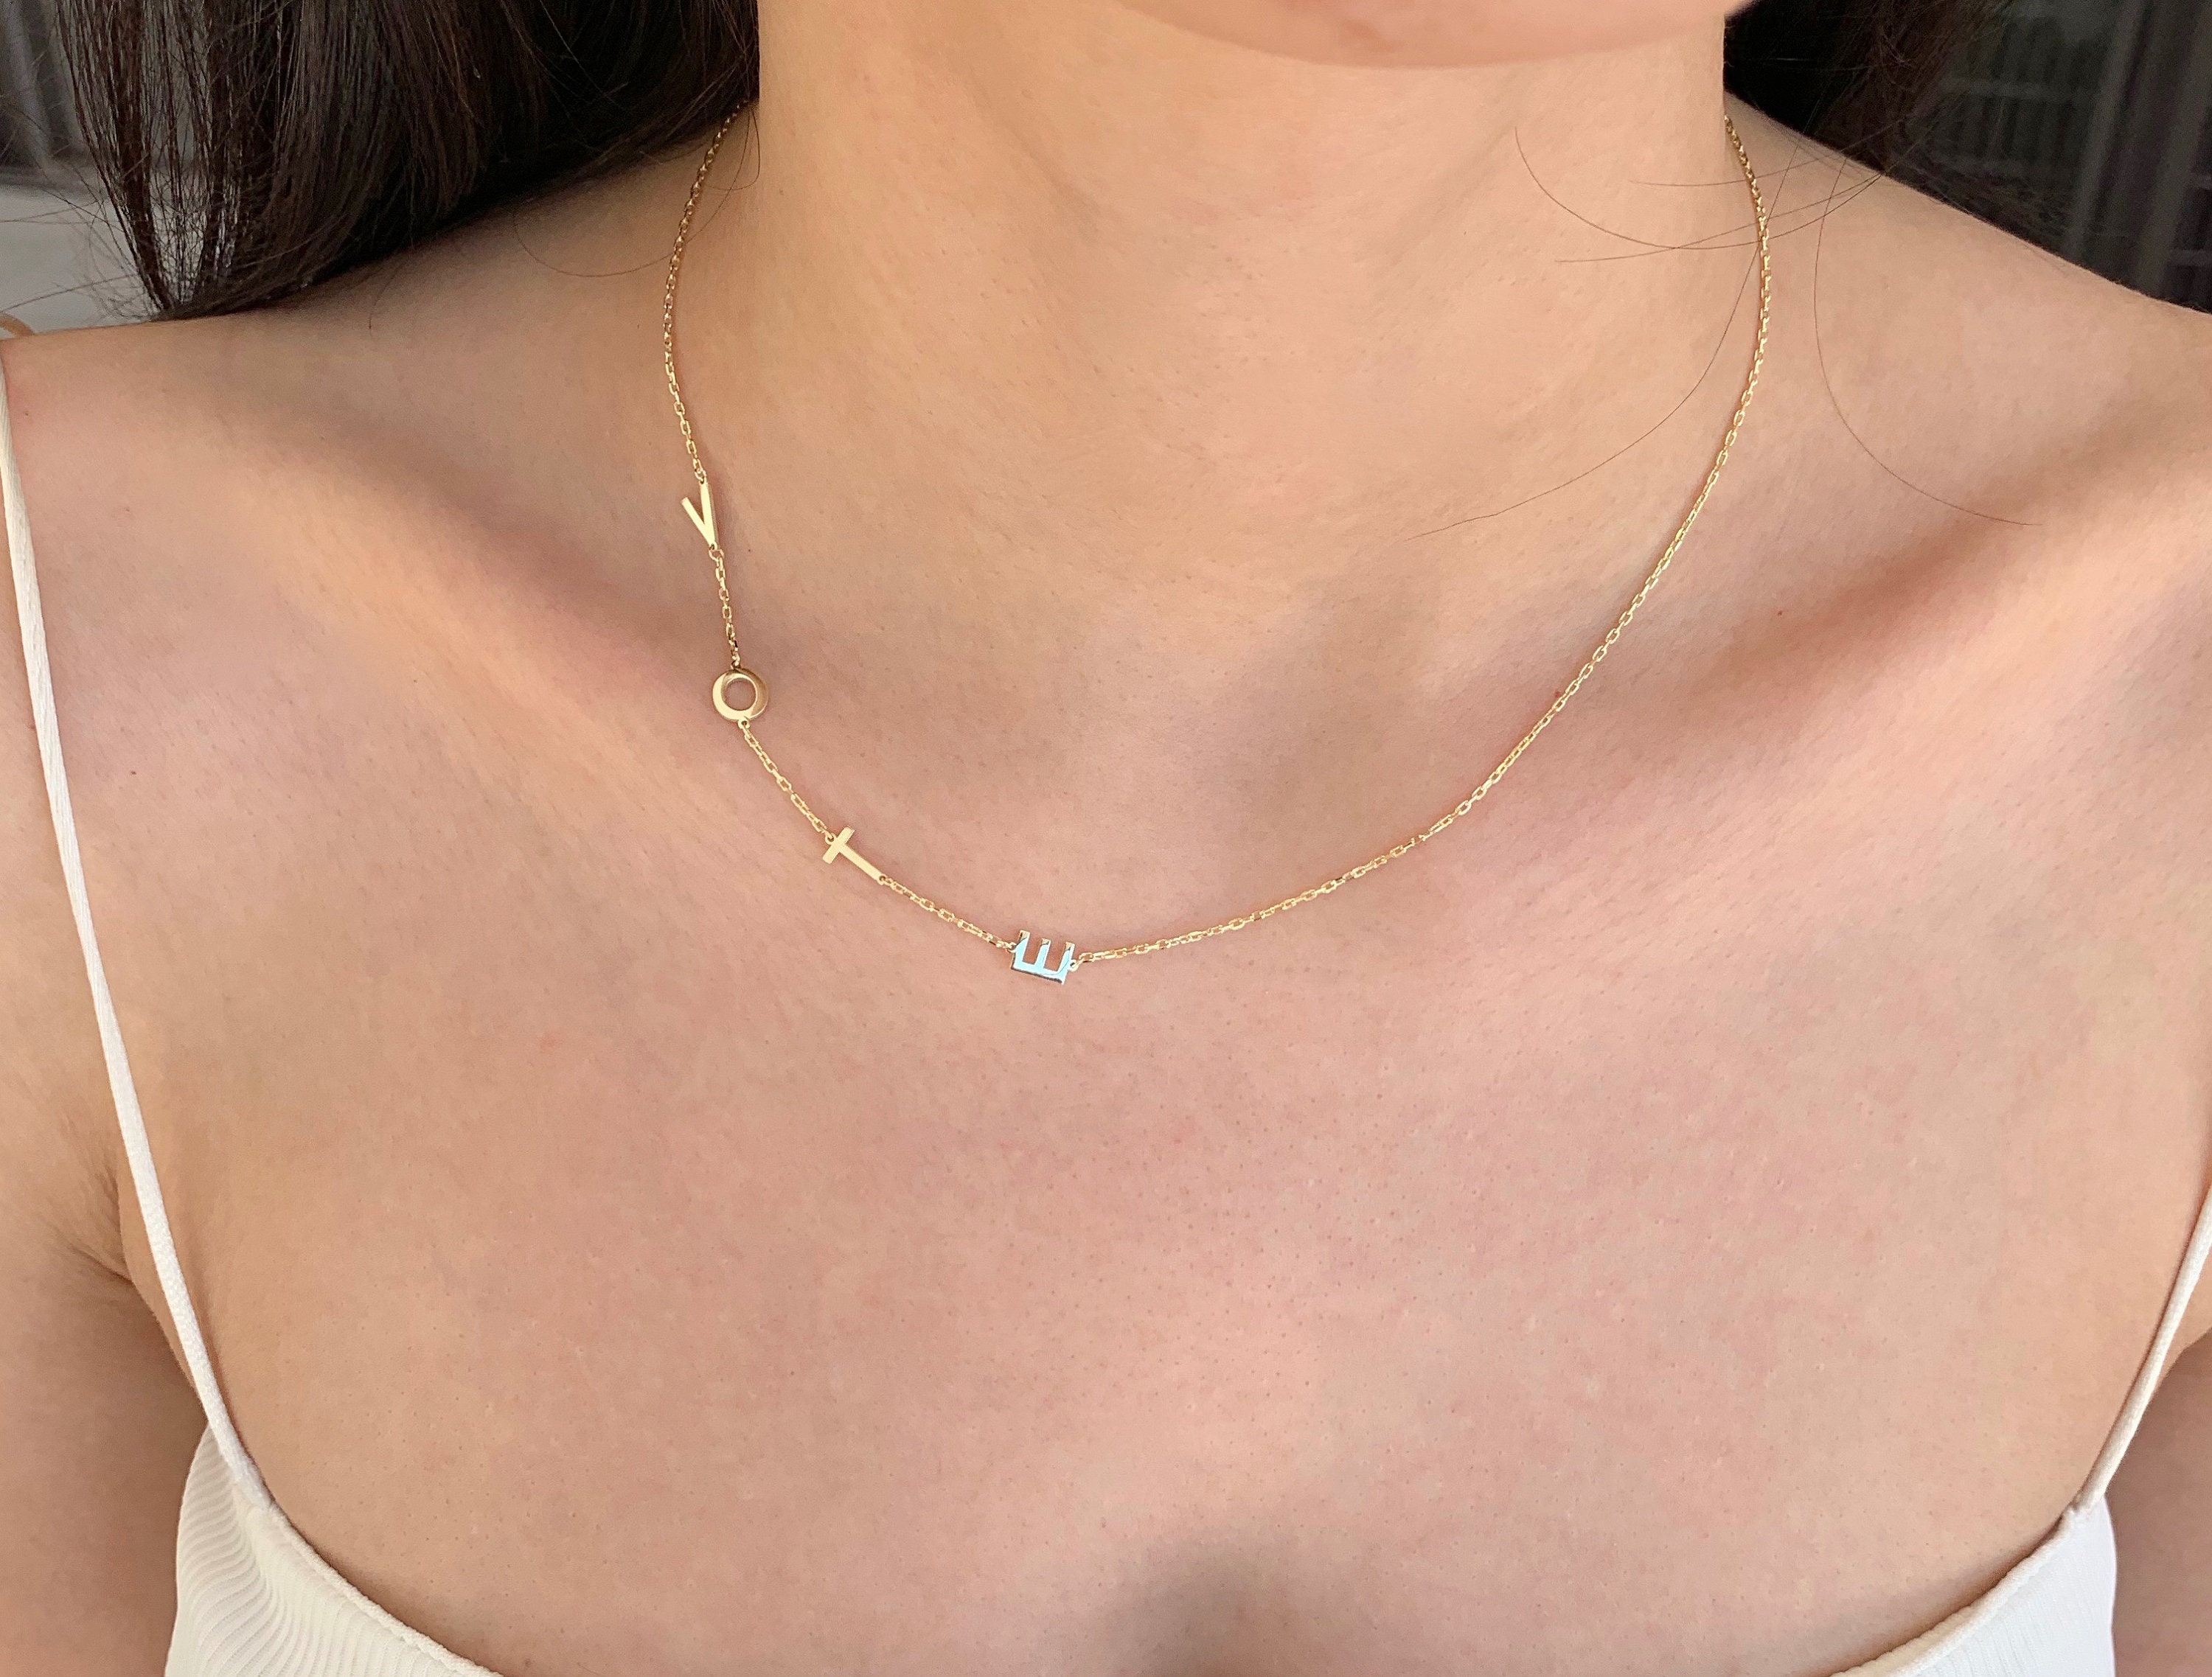 Gold Initial Necklace, Sideways Initial Necklace, Solid Gold Letter Necklace,  Monogram Name Necklace - Etsy | Initial necklace gold, Sideways initial  necklace, Icon necklace